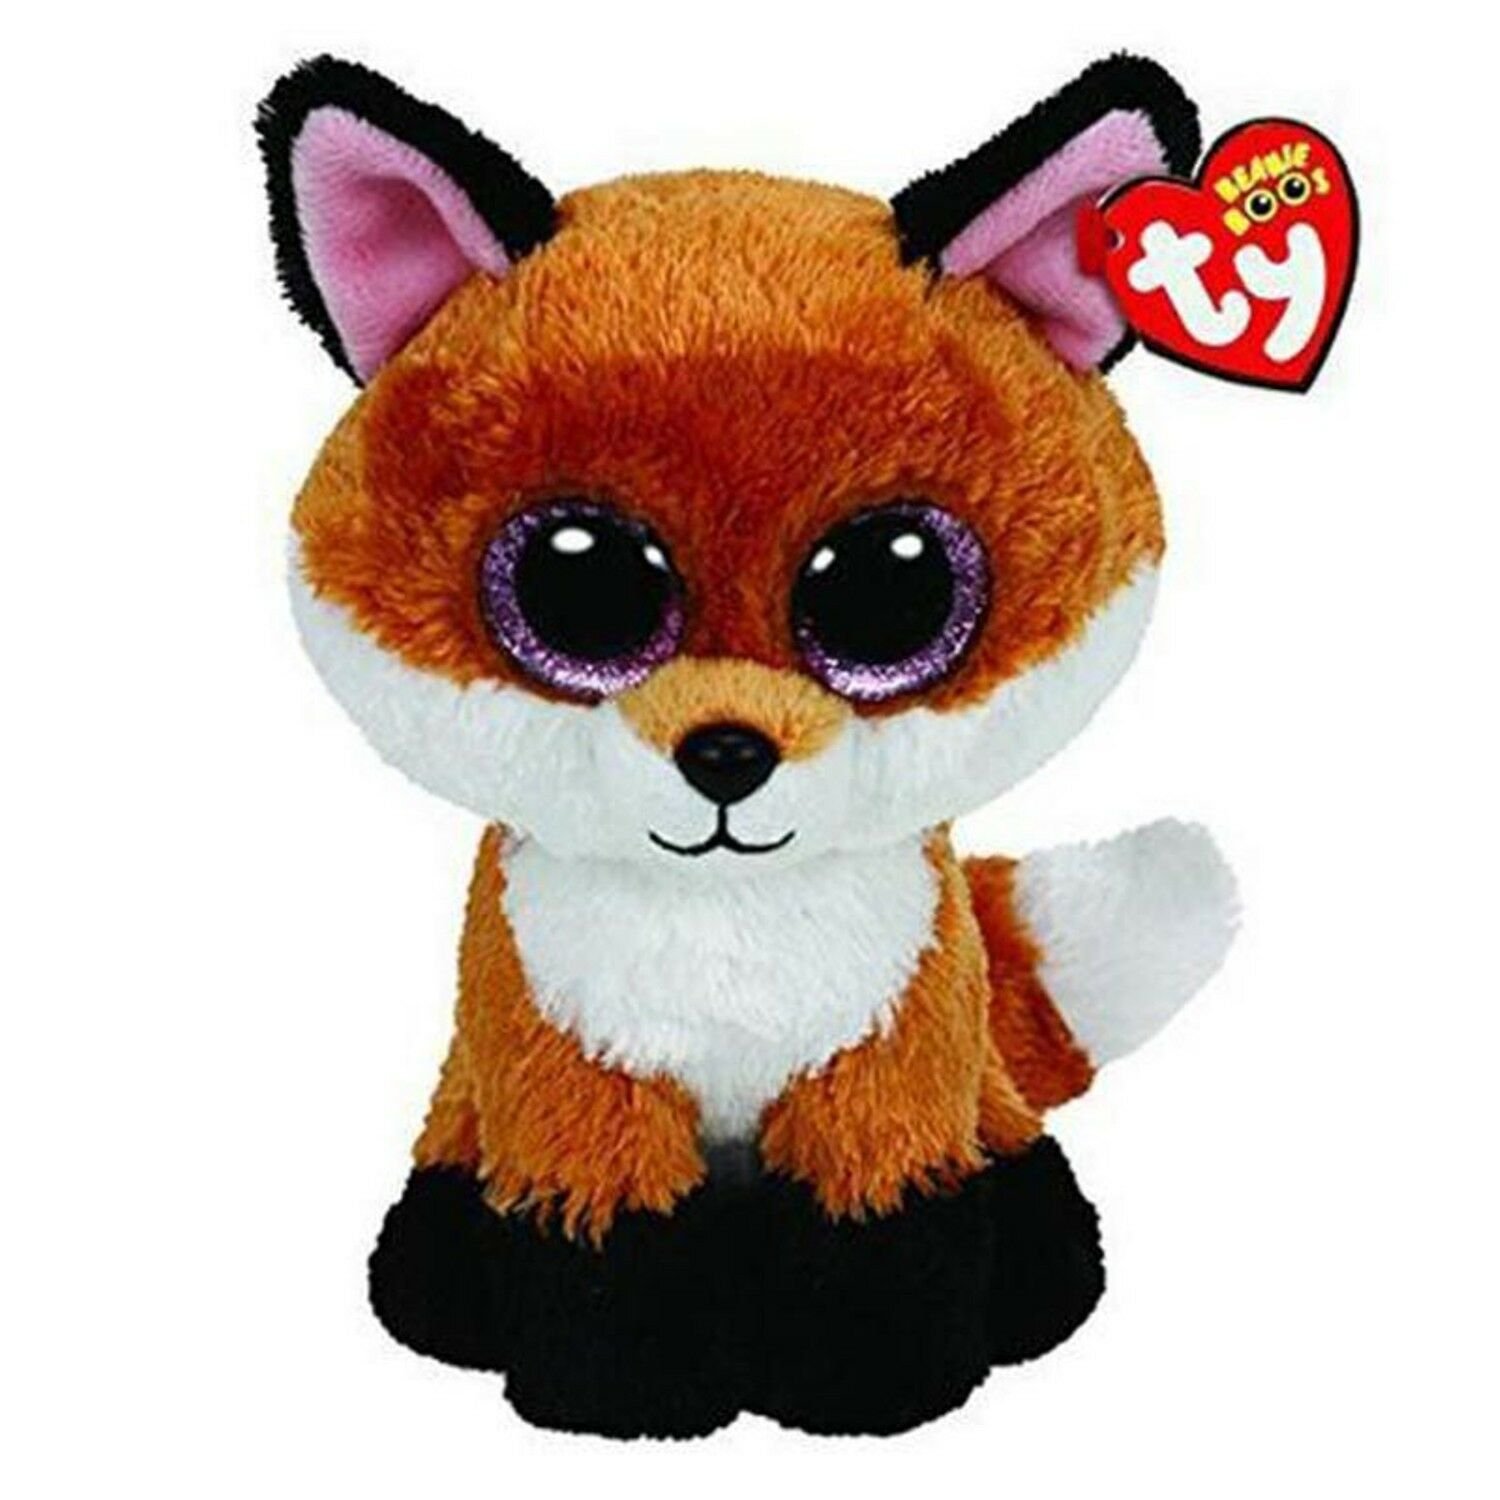 Ty Beanie Boos Stuffed & Plush Animal Colorful Brown Fox Toy Doll With ...